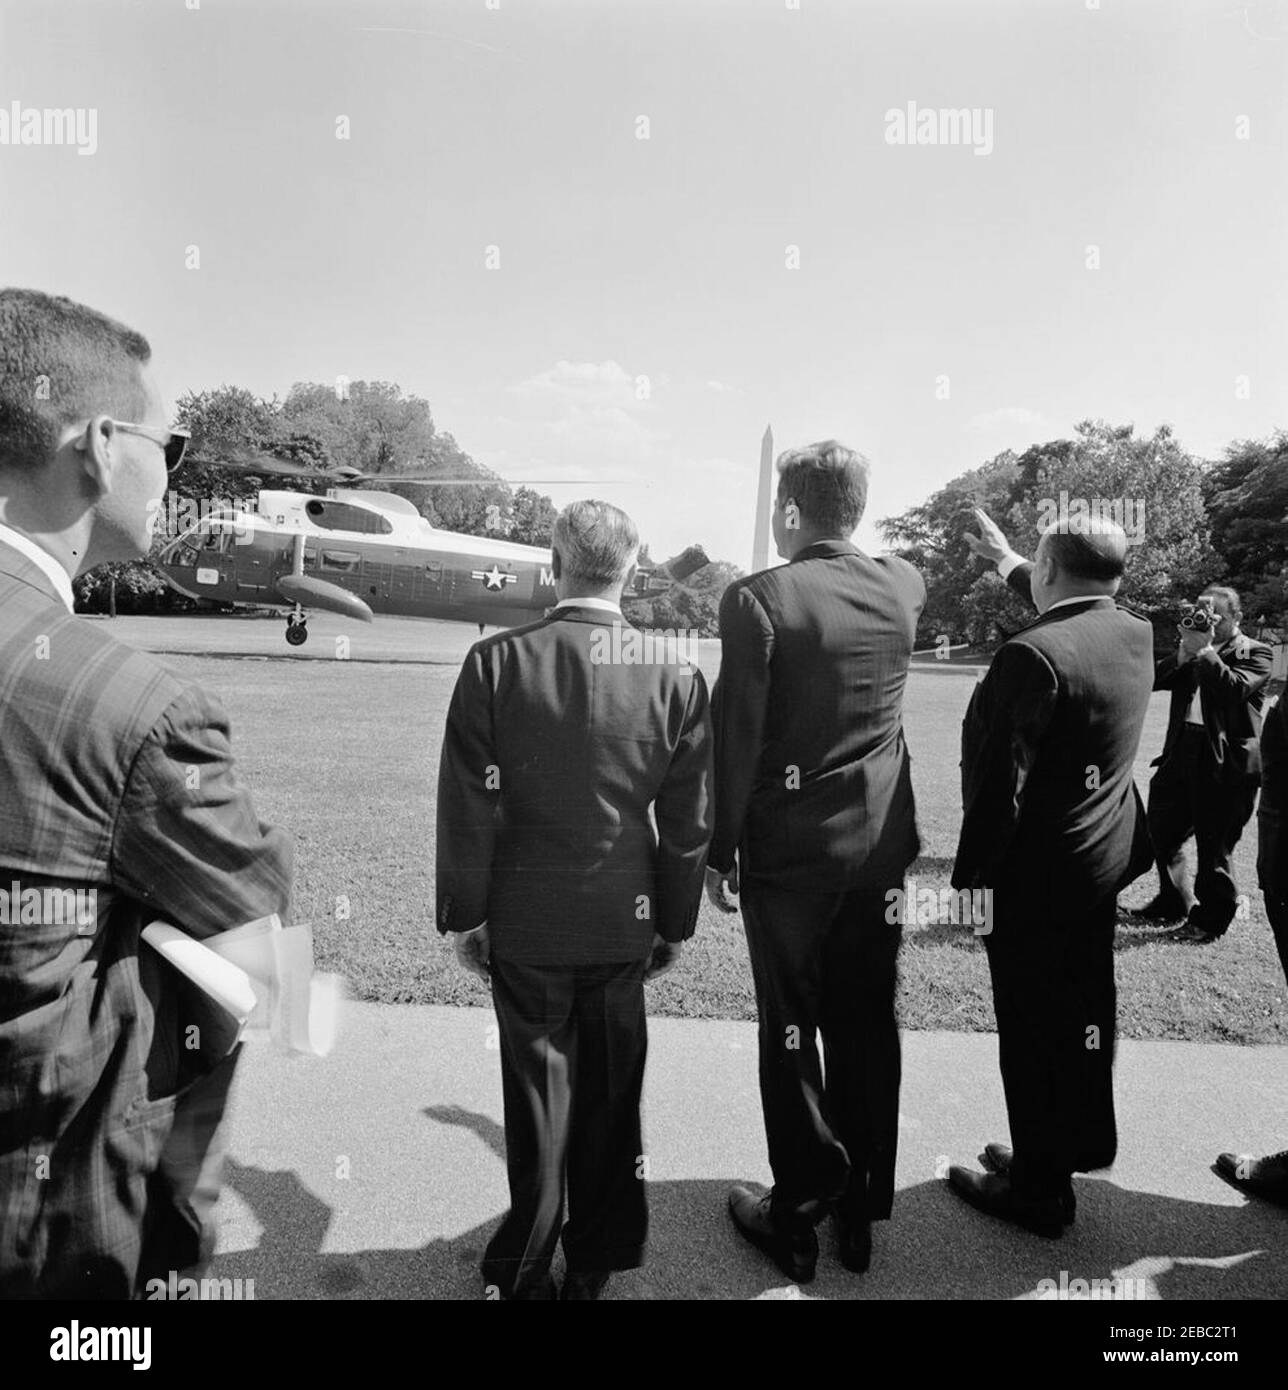 Ceremony marking Vice President Lyndon B. Johnsonu0027s (LBJ) departure on a good-will trip, 3:30PM. President John F. Kennedy and others bid farewell to Vice President Lyndon B. Johnson as his helicopter departs the South Lawn for a good-will trip to Lebanon, Iran, Turkey, Greece, Cyprus, and Italy. Ambassador of Italy, Sergio Fenoaltea, and Ambassador of Nicaragua and Dean of the Diplomatic Corps, Dr. Guillermo Sevilla-Sacasa, stand on either side of President Kennedy. White House, Washington, D.C. Stock Photo